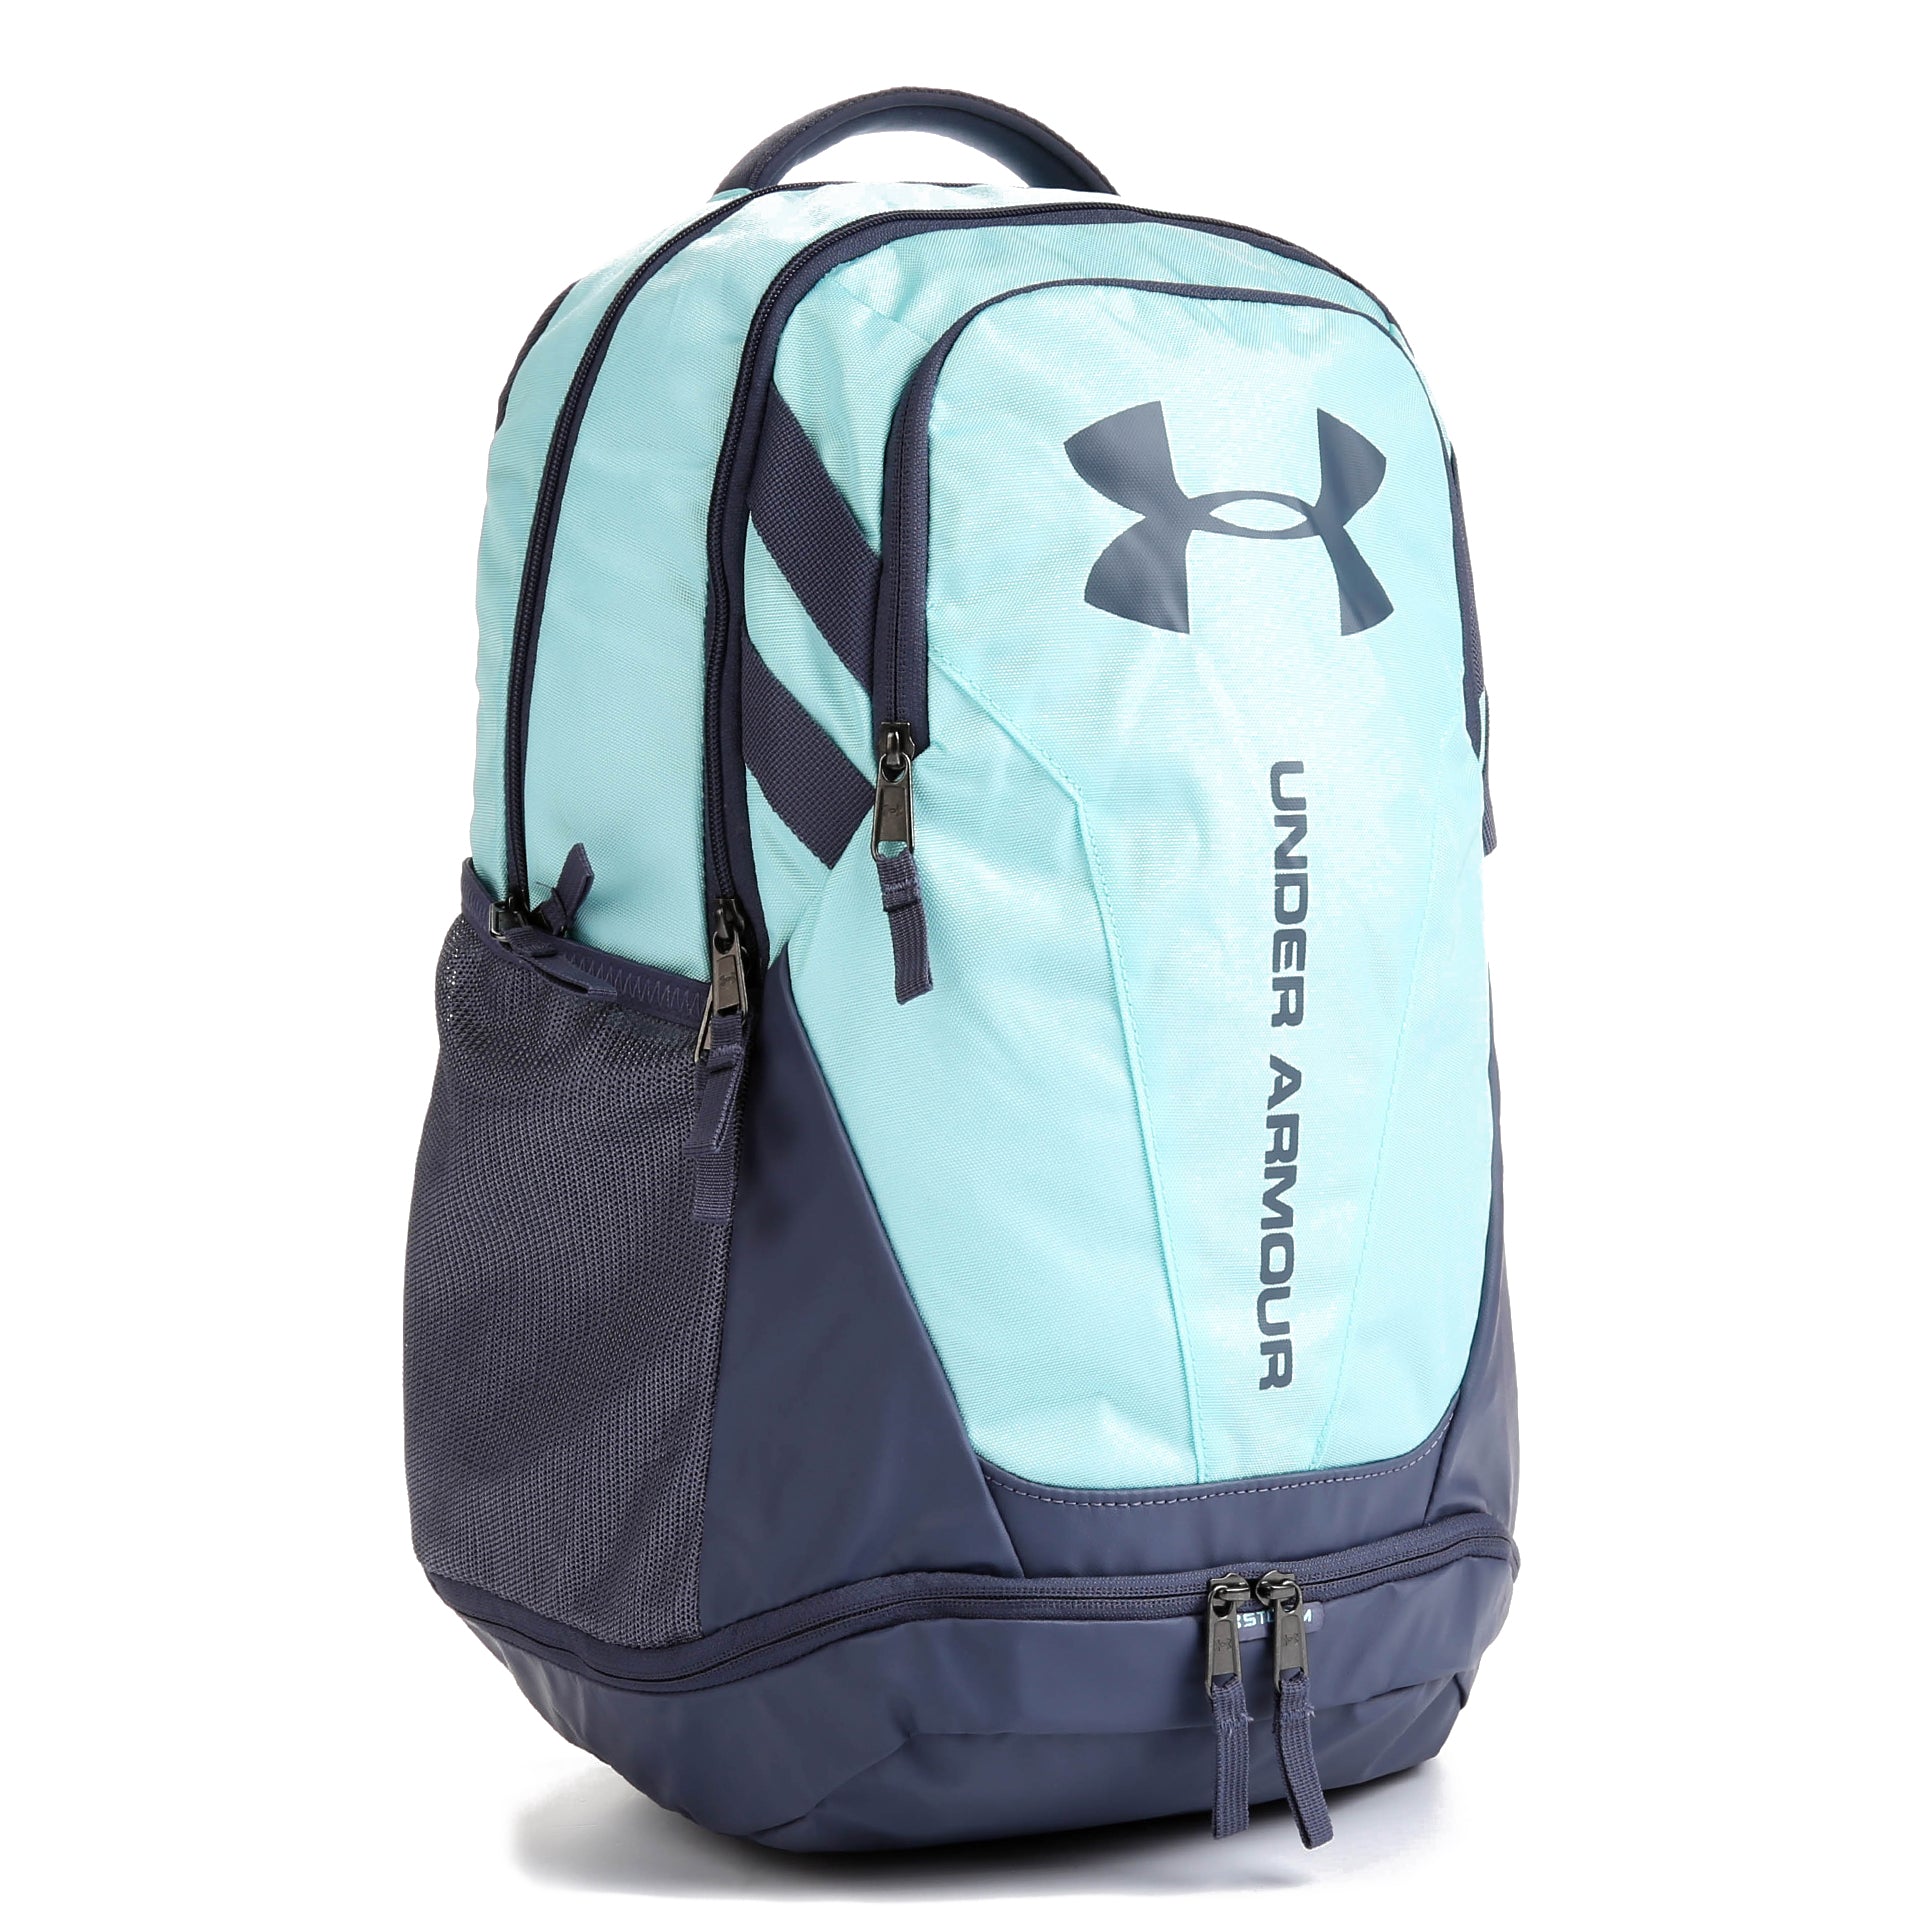 Blue Under Armour Backpack  Under armour backpack, Cute backpacks